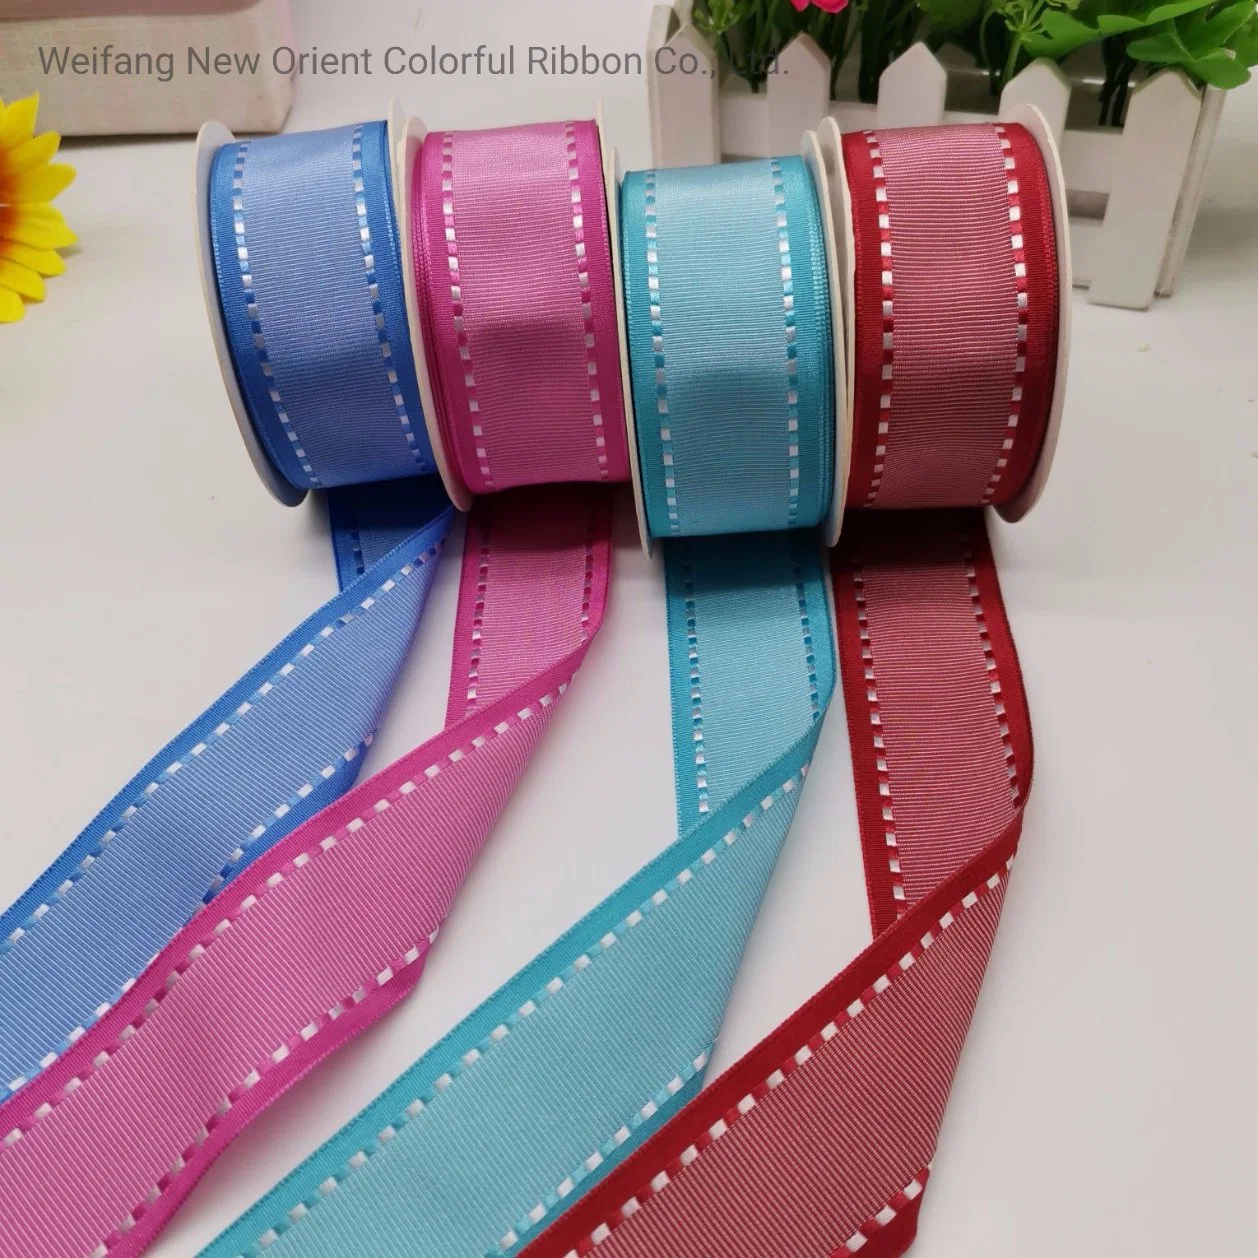 Nylon Grosgrain Stitch Ribbon Accessories Wrapping Gift Bows/Packing/Christmas Holiday Decoration